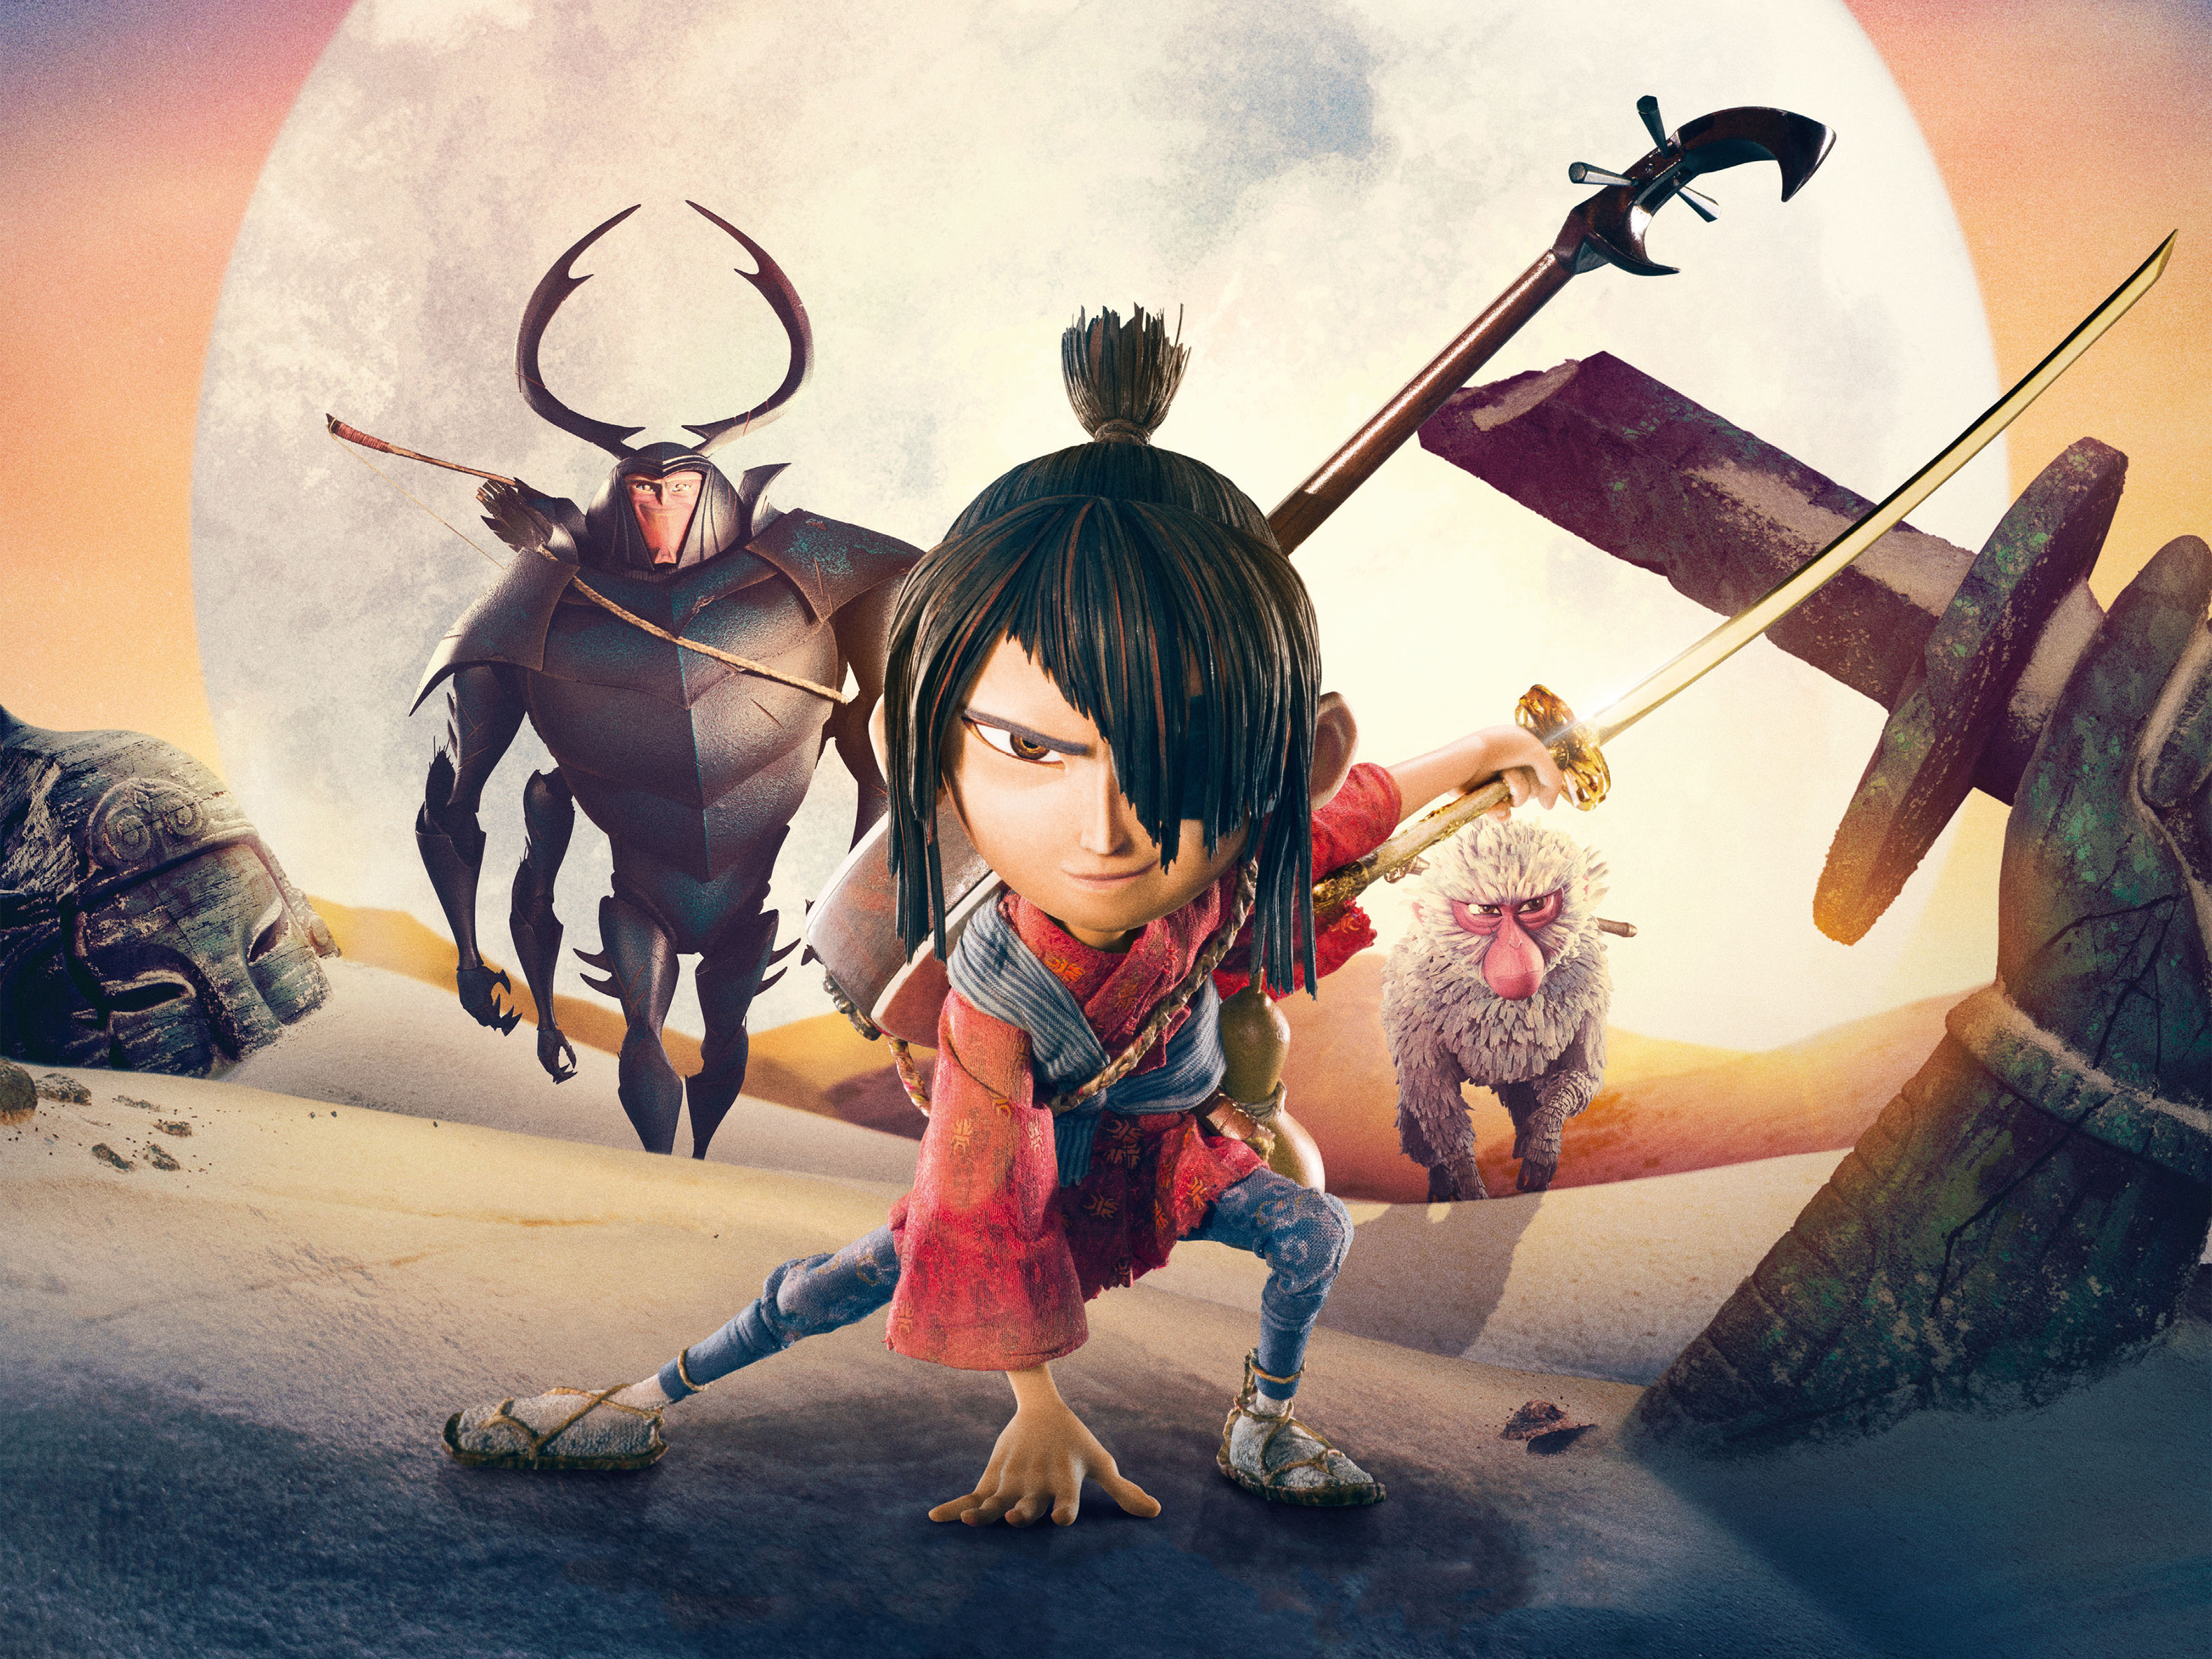 Kubo Kubo And The Two Strings Monkey Kubo And The Two Strings Beetle Kubo And The Two Strings Kubo A 3158x2369